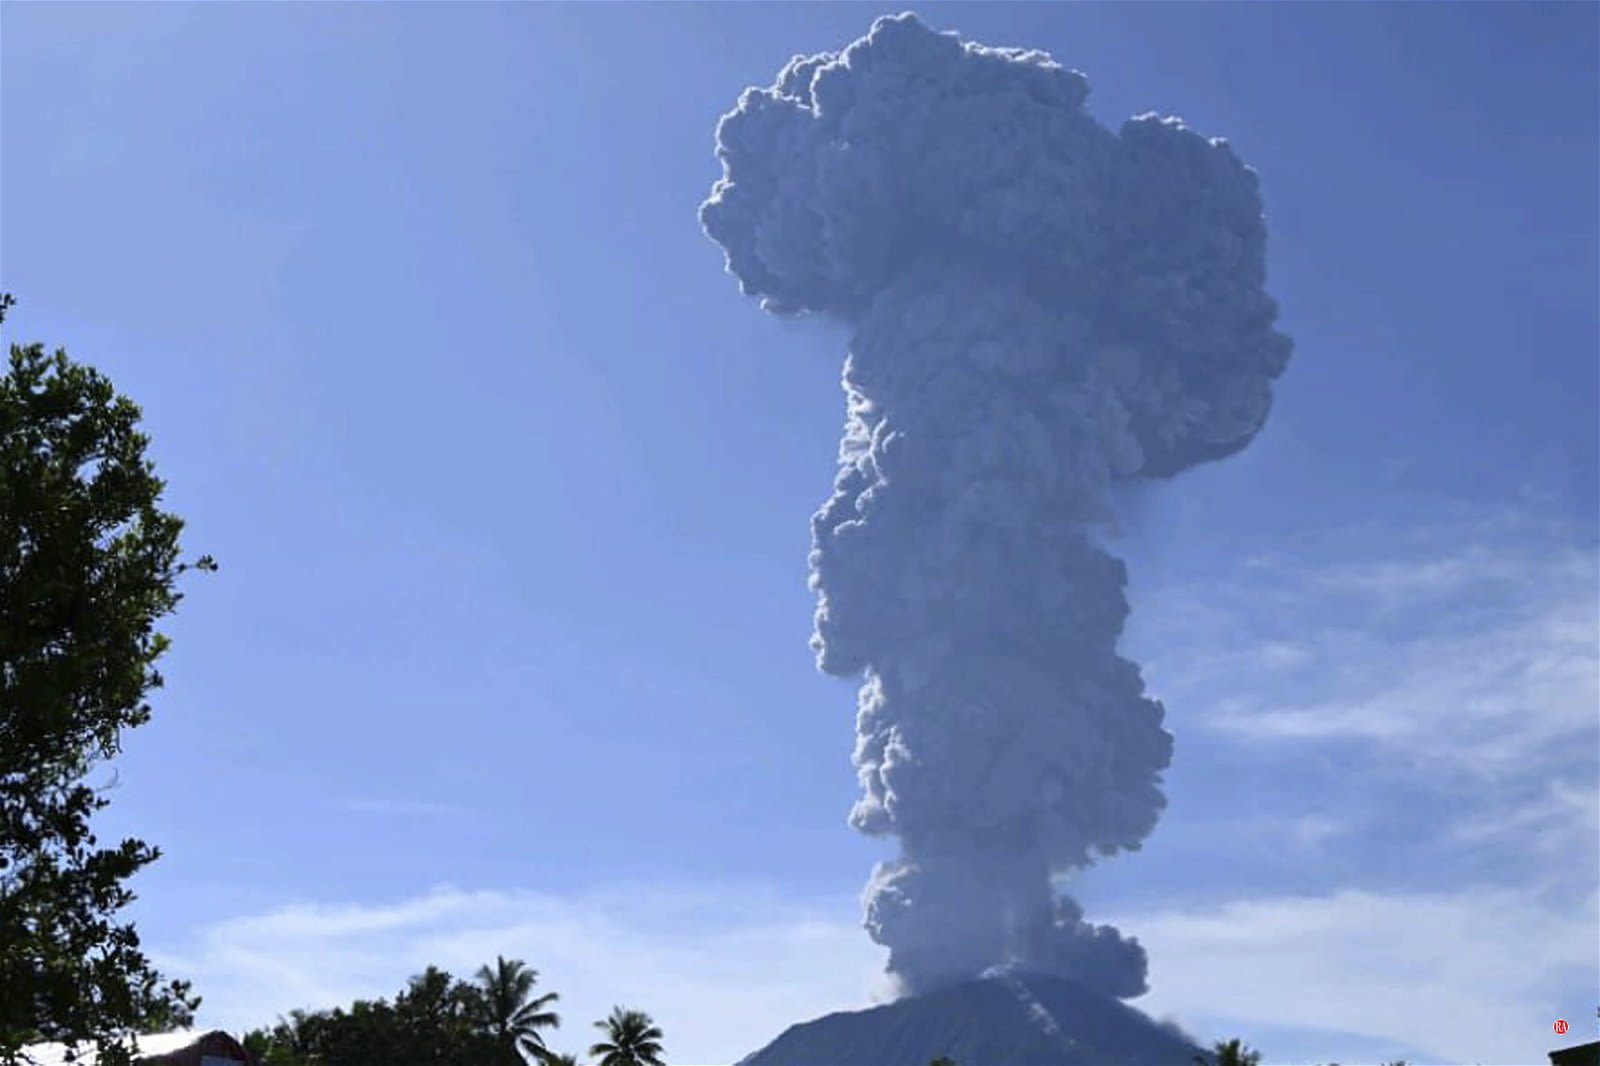 Indonesia's Mount Ibu erupts, spewing thick ash and dark clouds into the sky